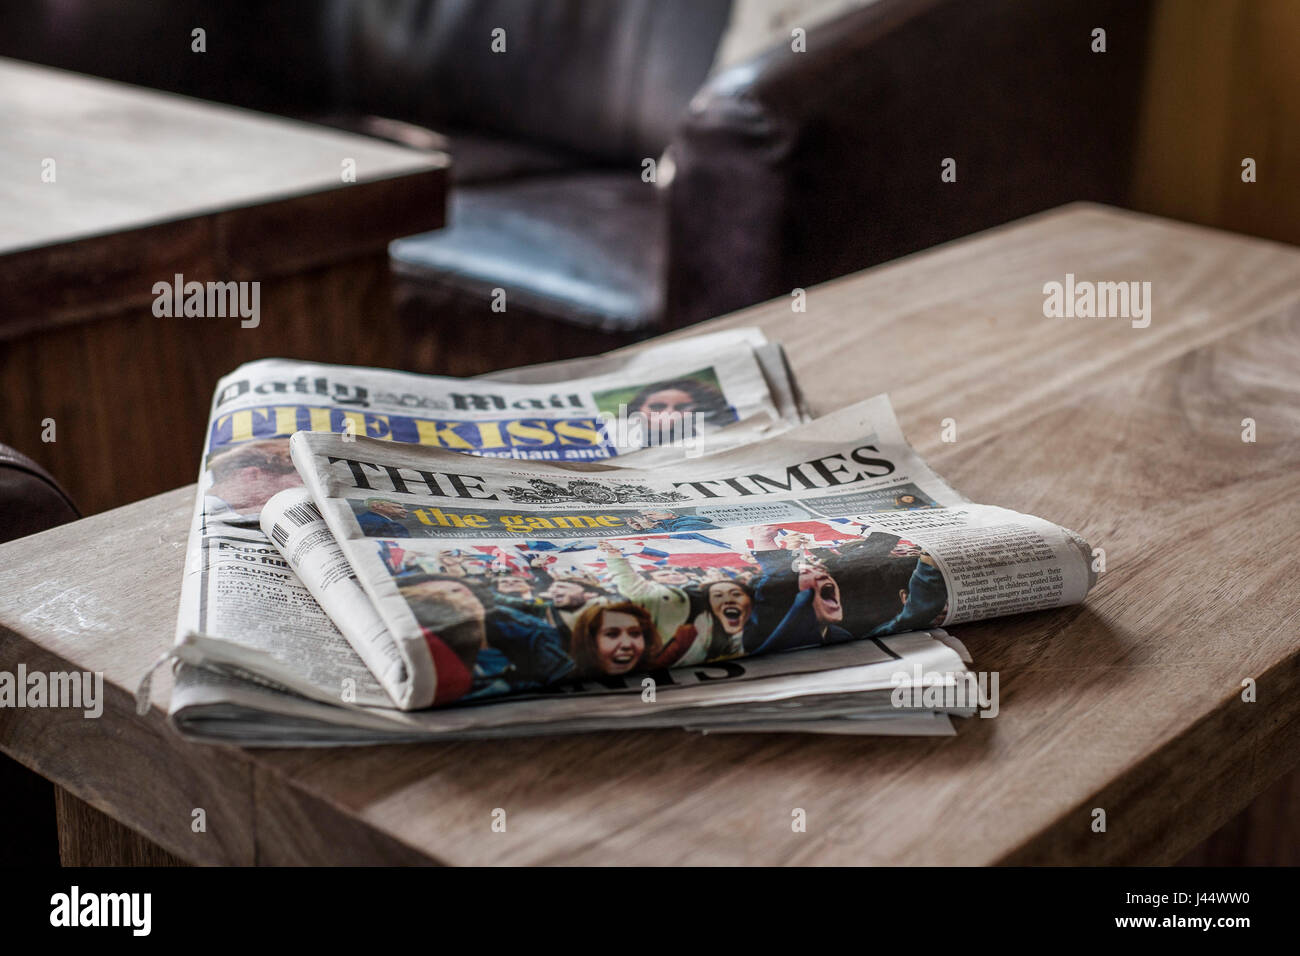 Newspapers on a table The Times newspaper Daily Mail newspaper Used Read Table Print Periodicals Editions Stock Photo